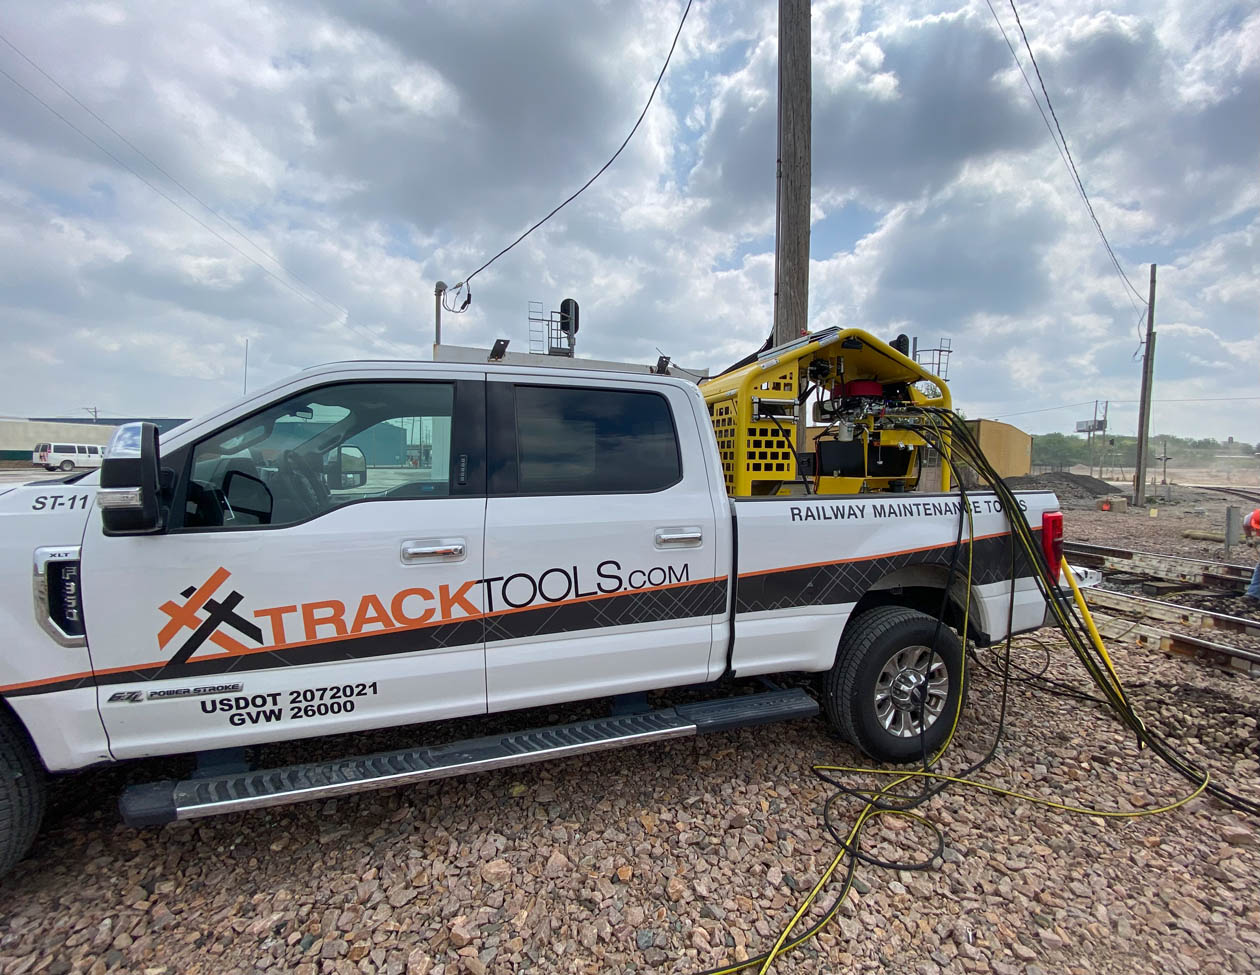 In a work zone with low clearance on overhead wires, the HydraSkid 248 was able to be operated conveniently from the bed off the pickup truck.